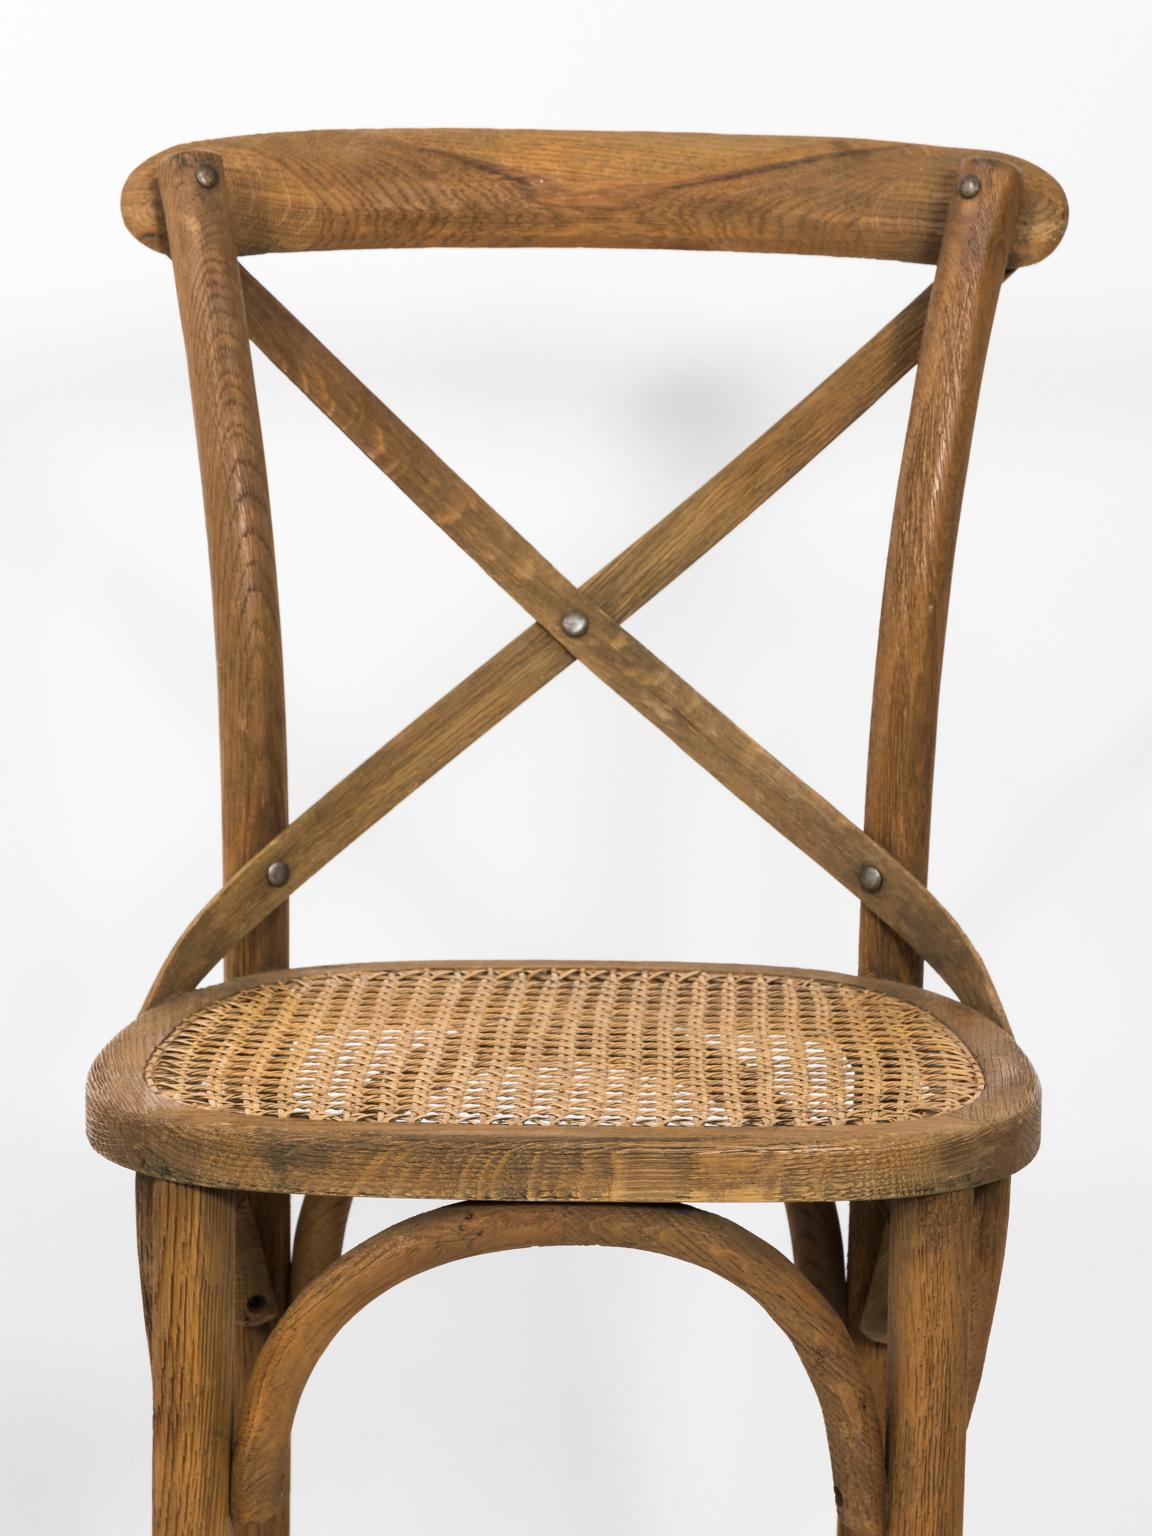 Set of four vintage unfinished wood bar stools with cane woven seating. Please note of wear consistent with age.
  